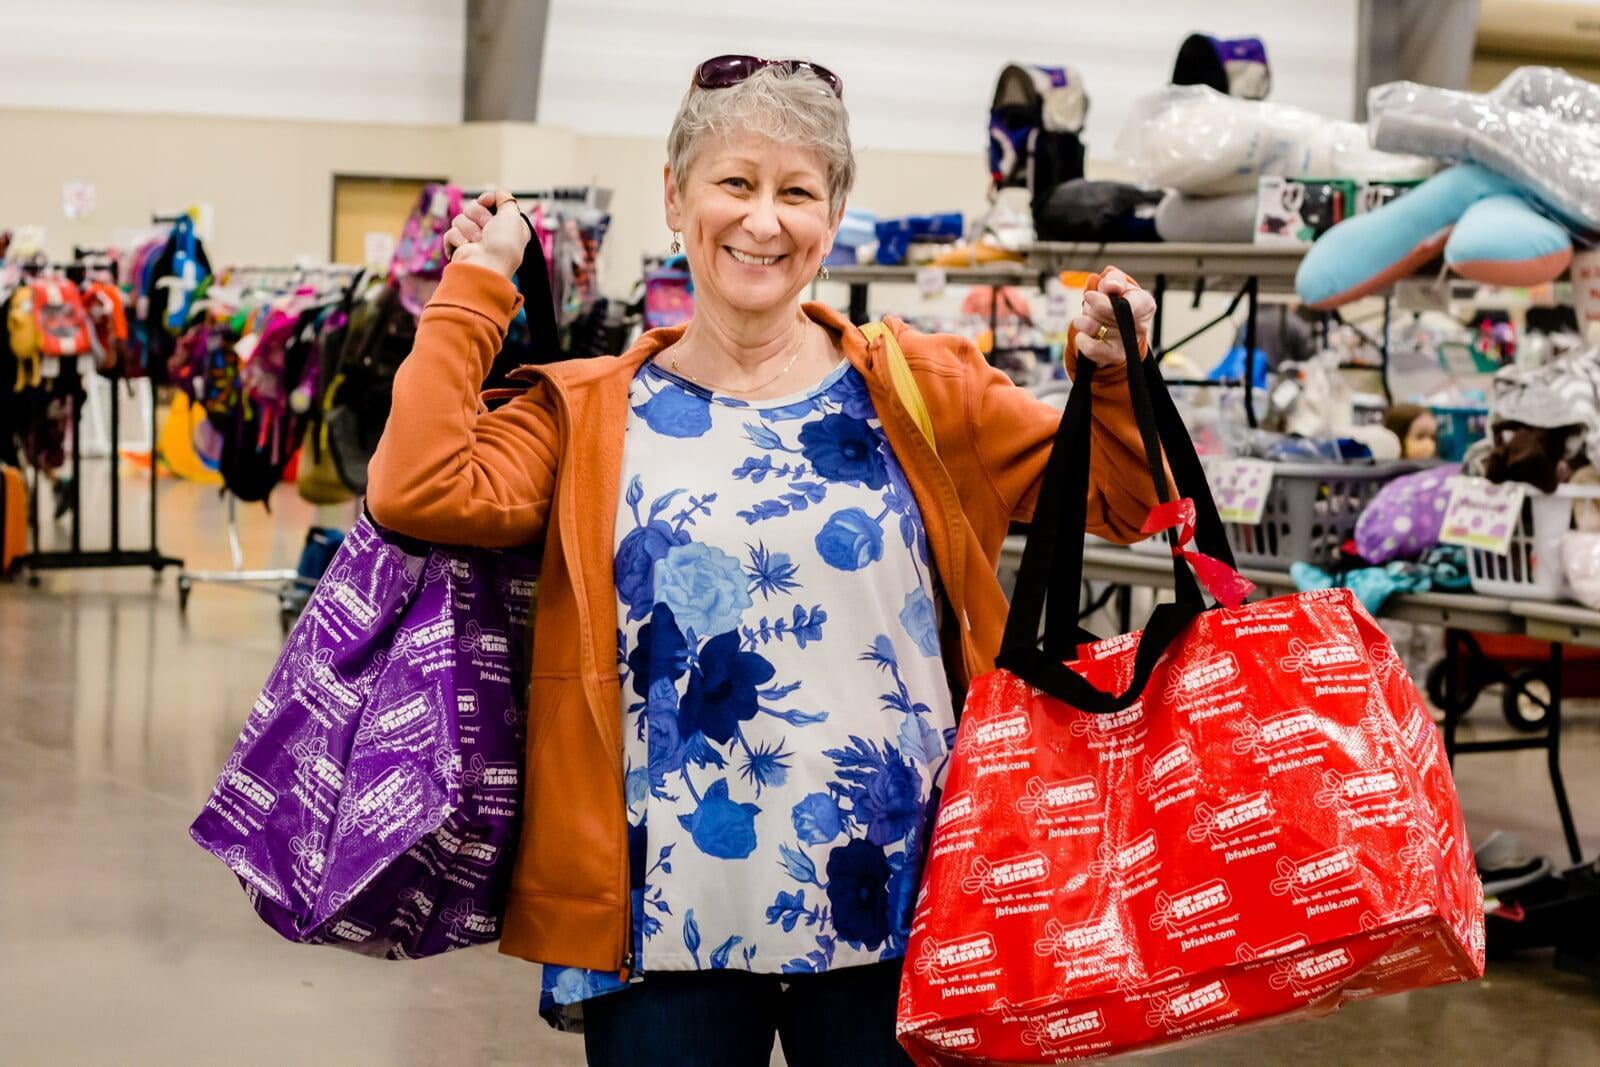 A proud grandma holds up 2 JBF shopping bags, one in each hand for each grandchild.